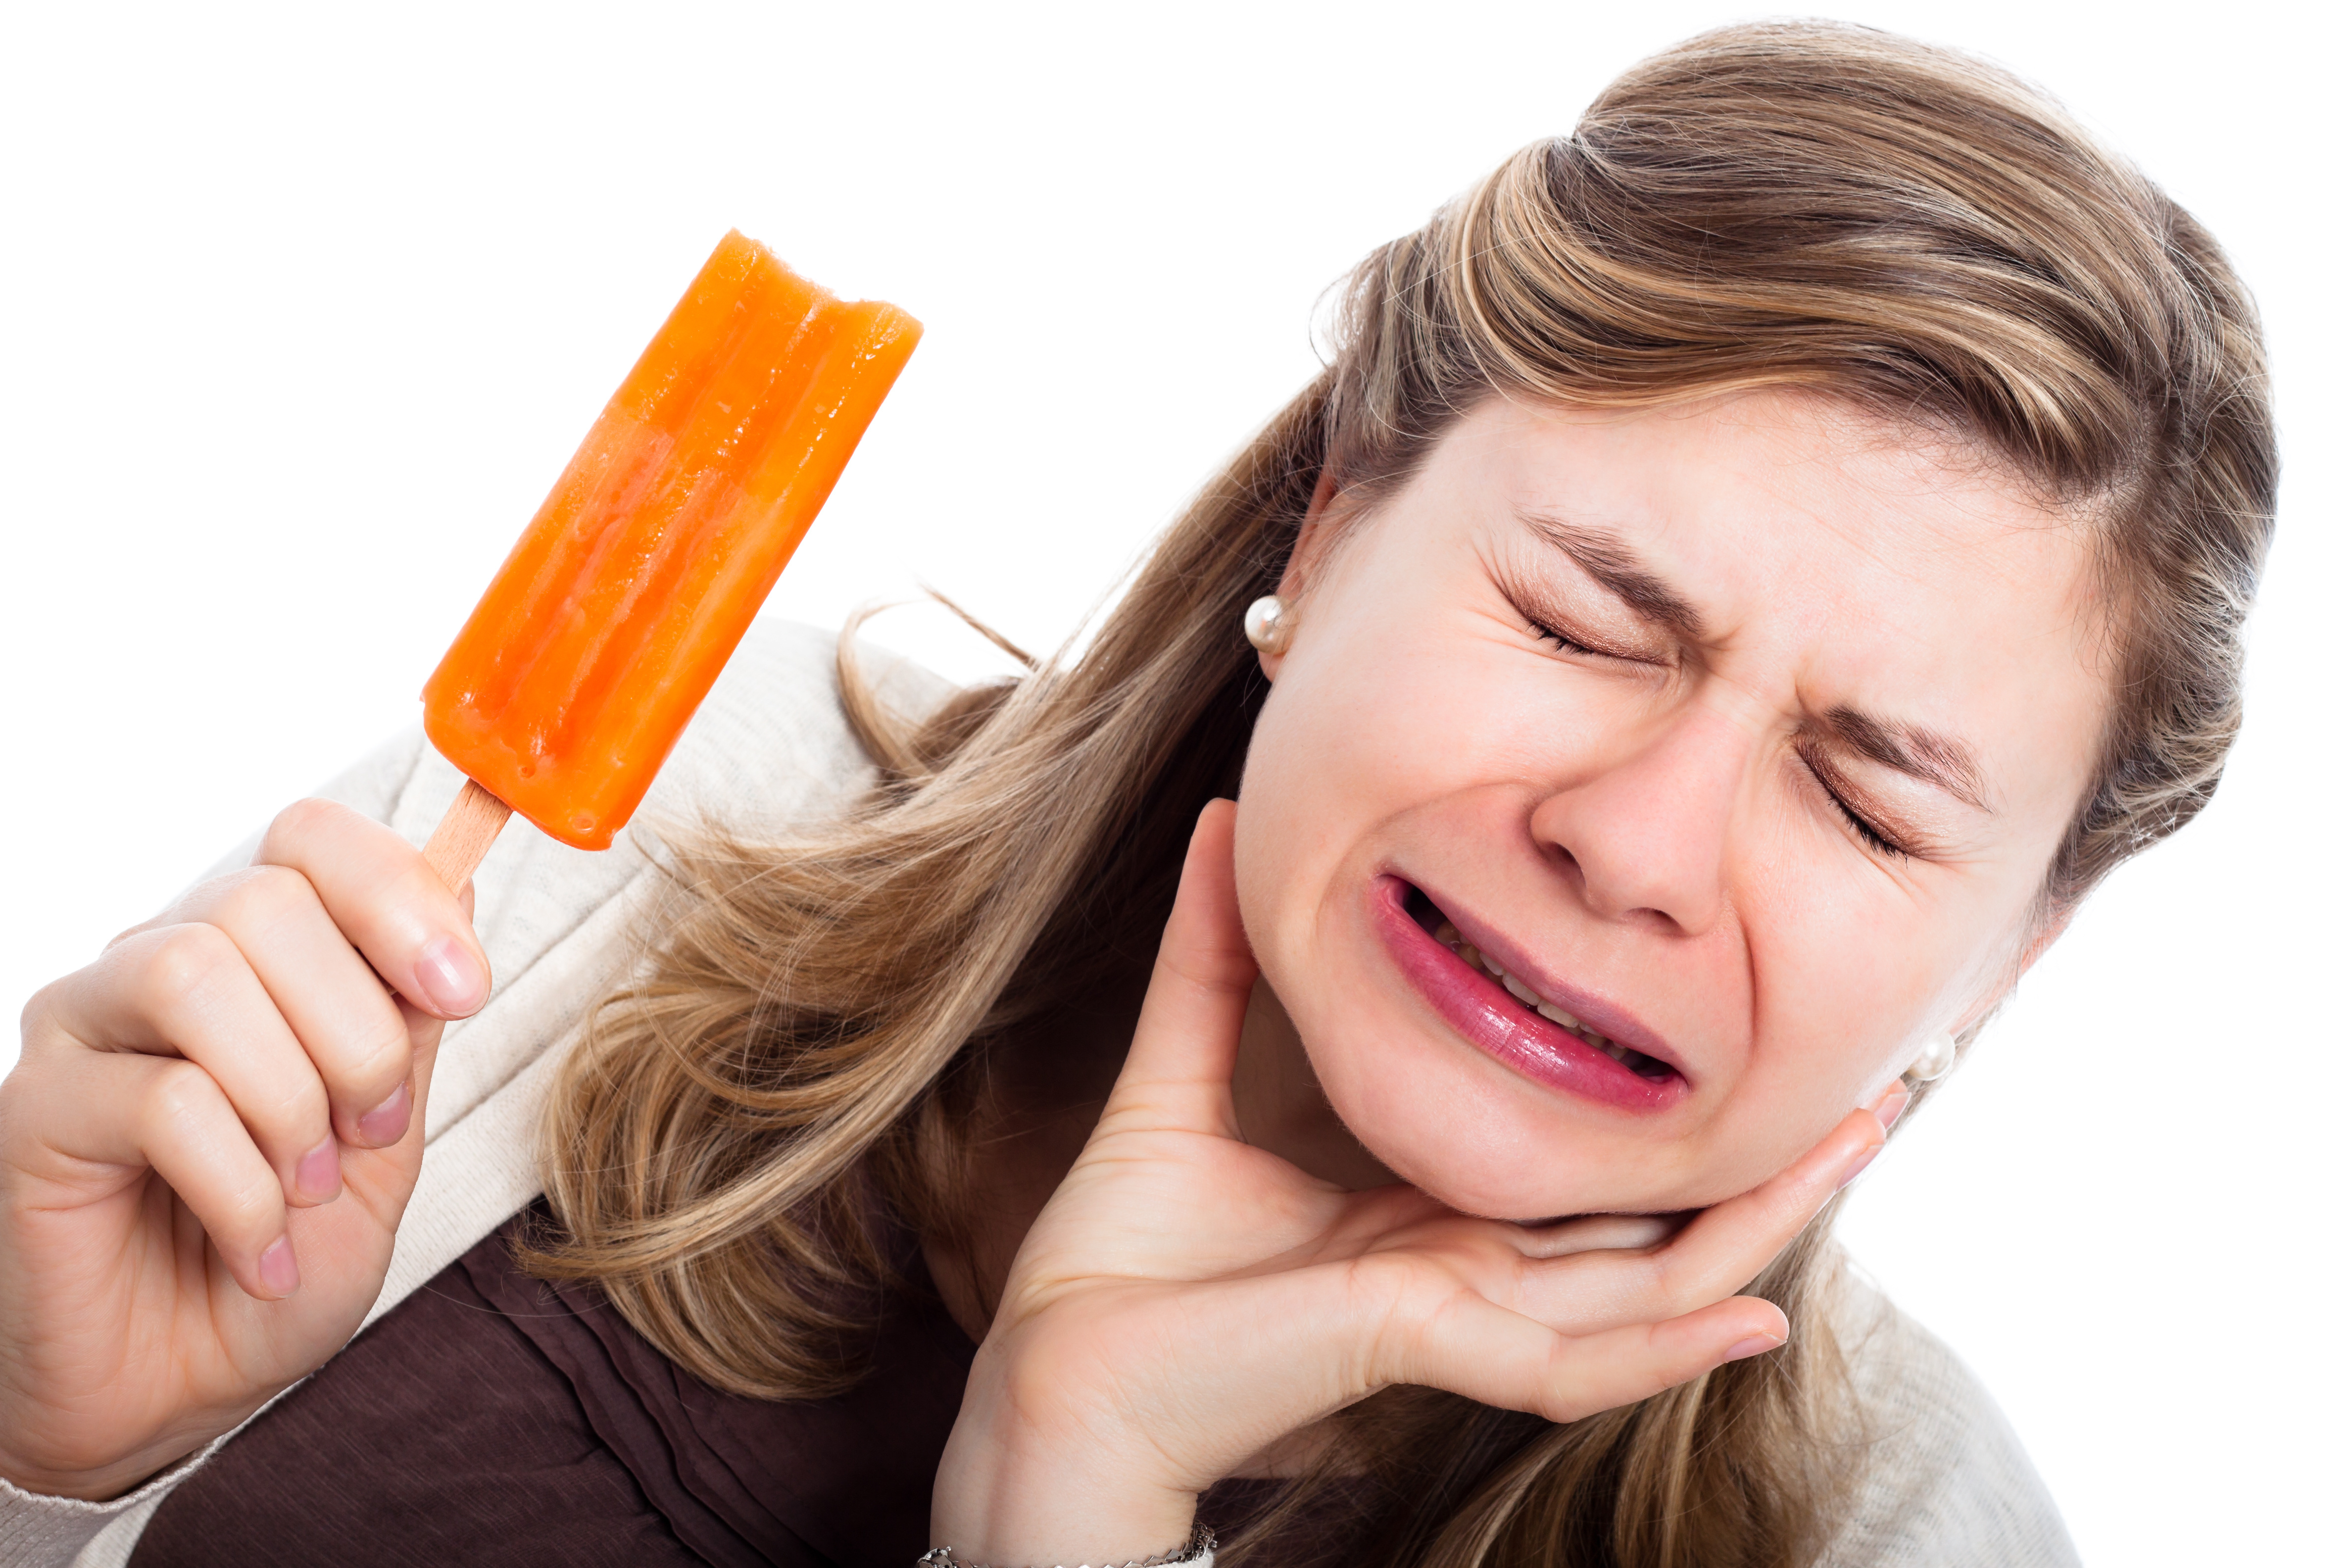 Woman with hypersensitive teeth eating ice lolly